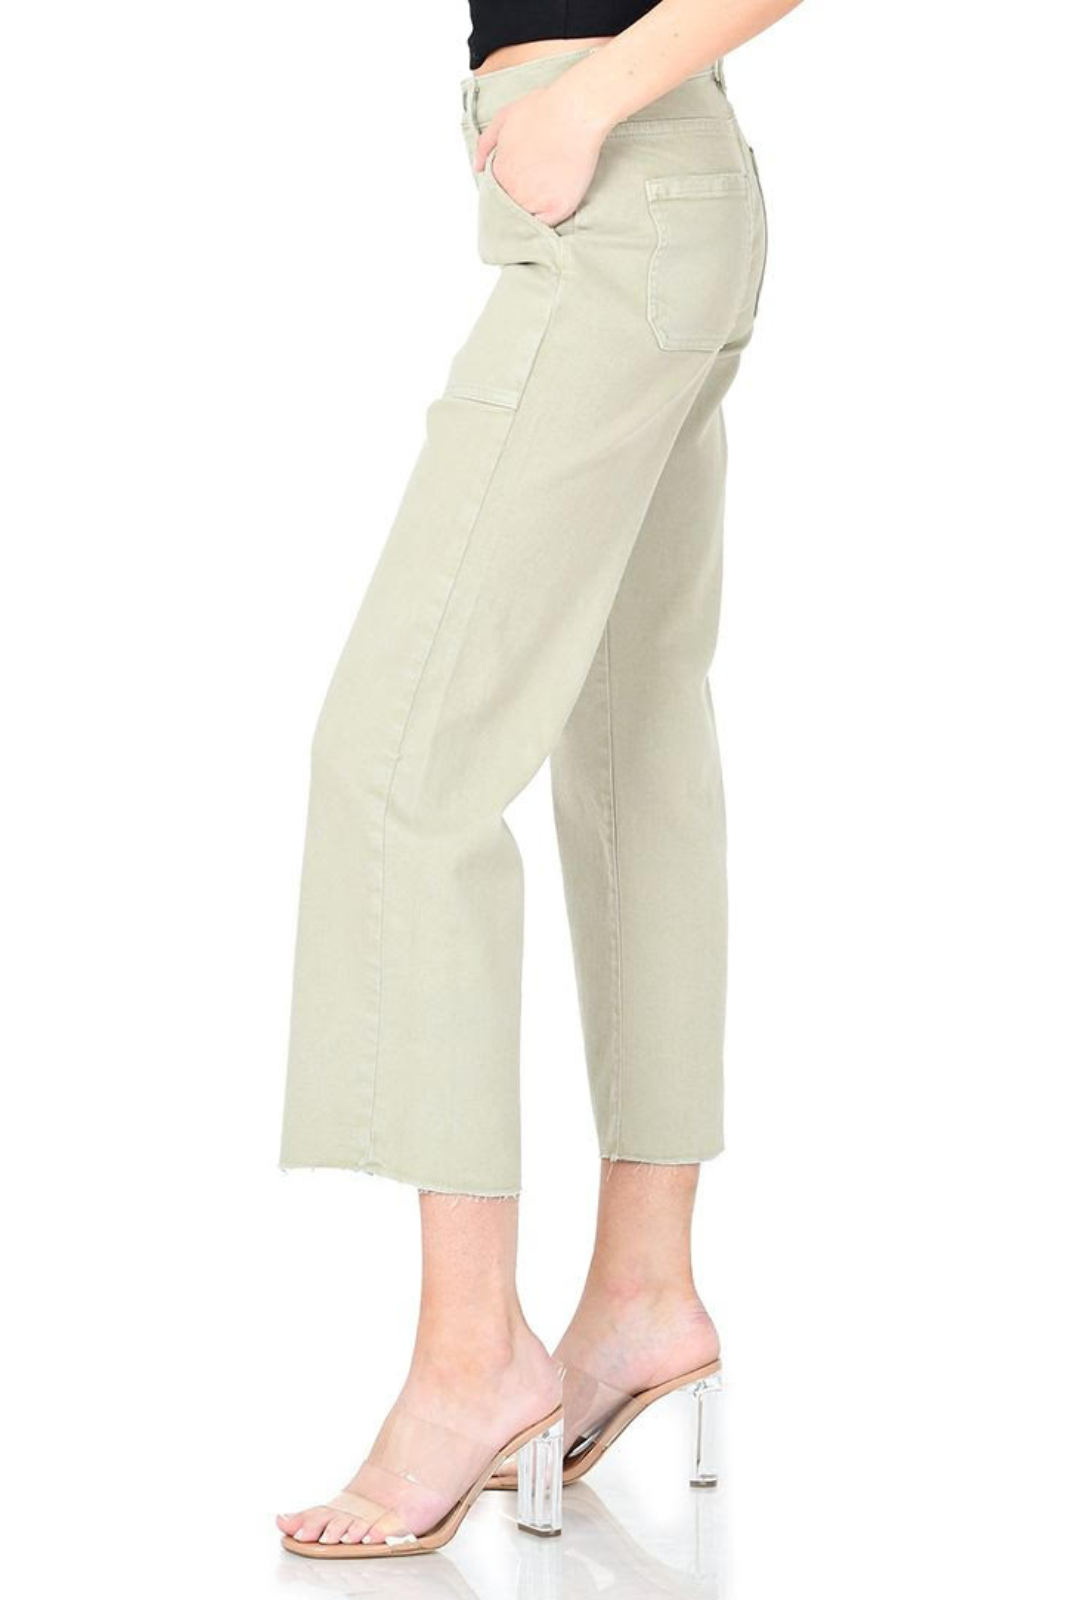 Modern American Farrah Crop - Olive. A classic utility silhouette in wide-leg pants updated with a cropped length.